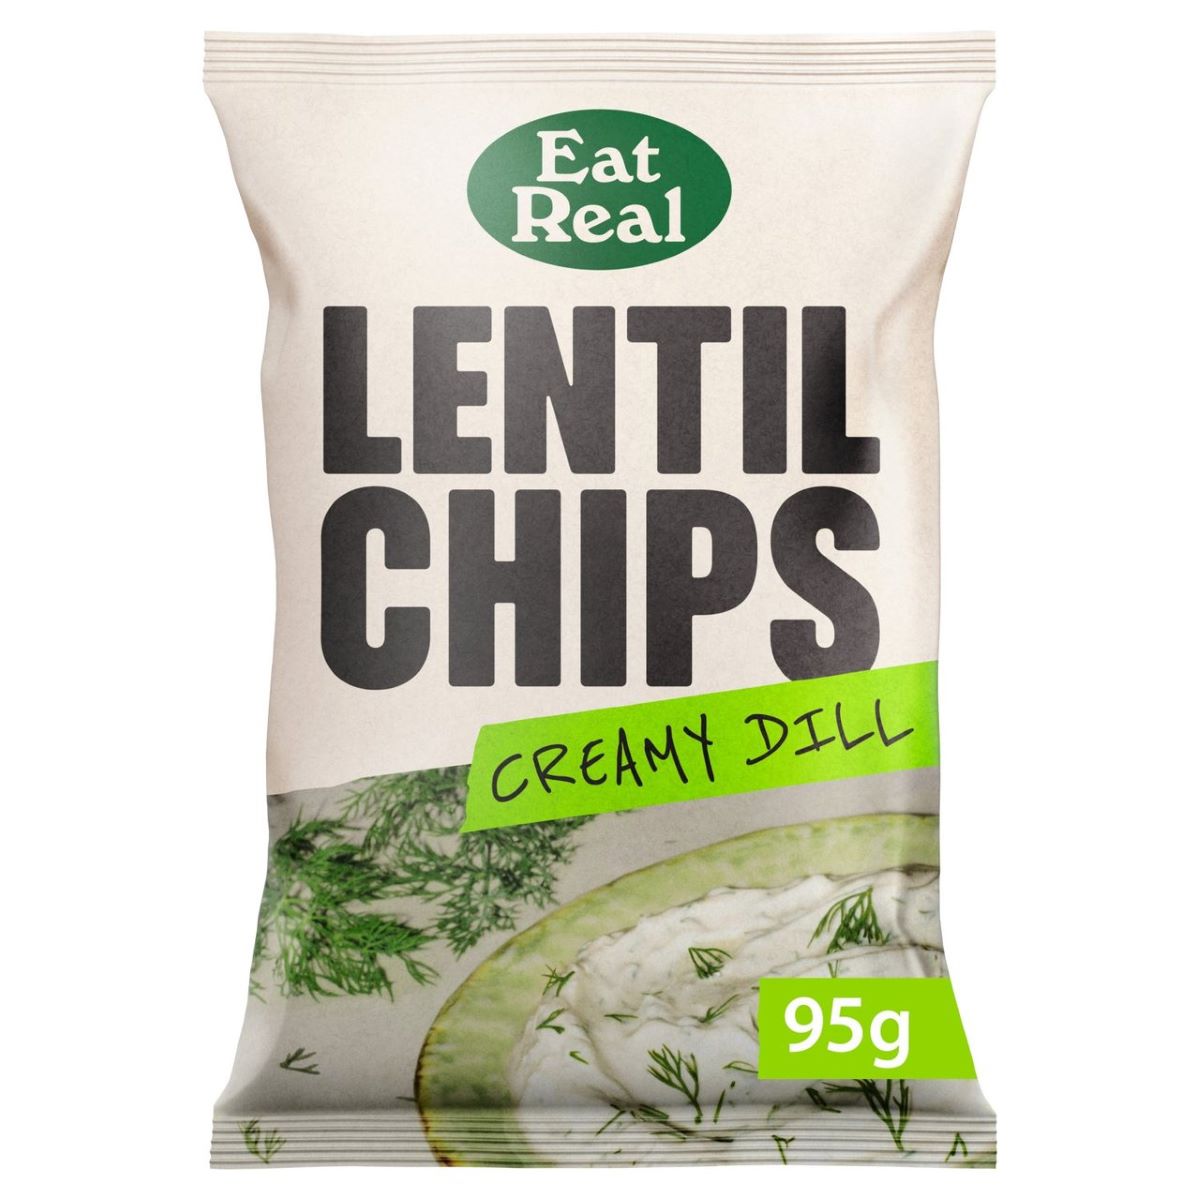 Eat Real Lentil Chips Creamy Dill 95g